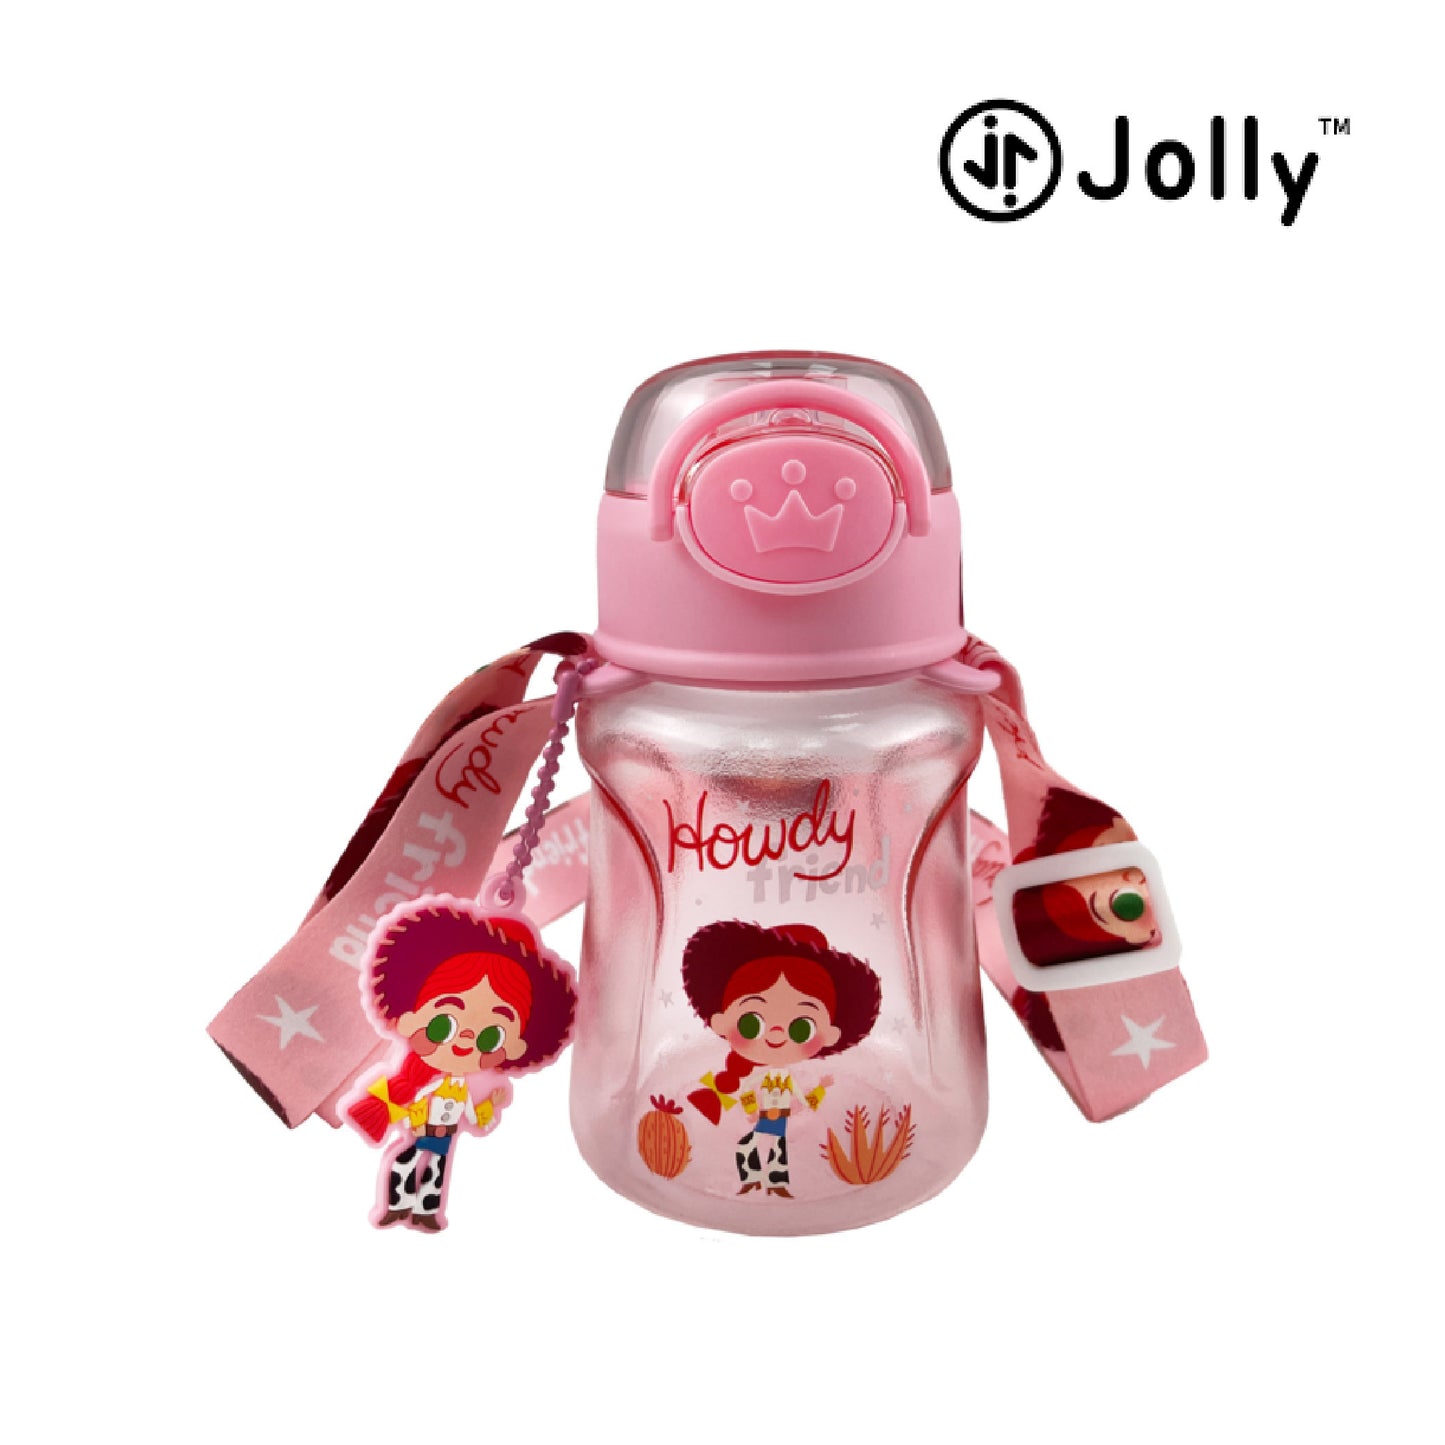 [Jolly UK] Toy Story Series Summer Water Bottle - 5 Colors Available